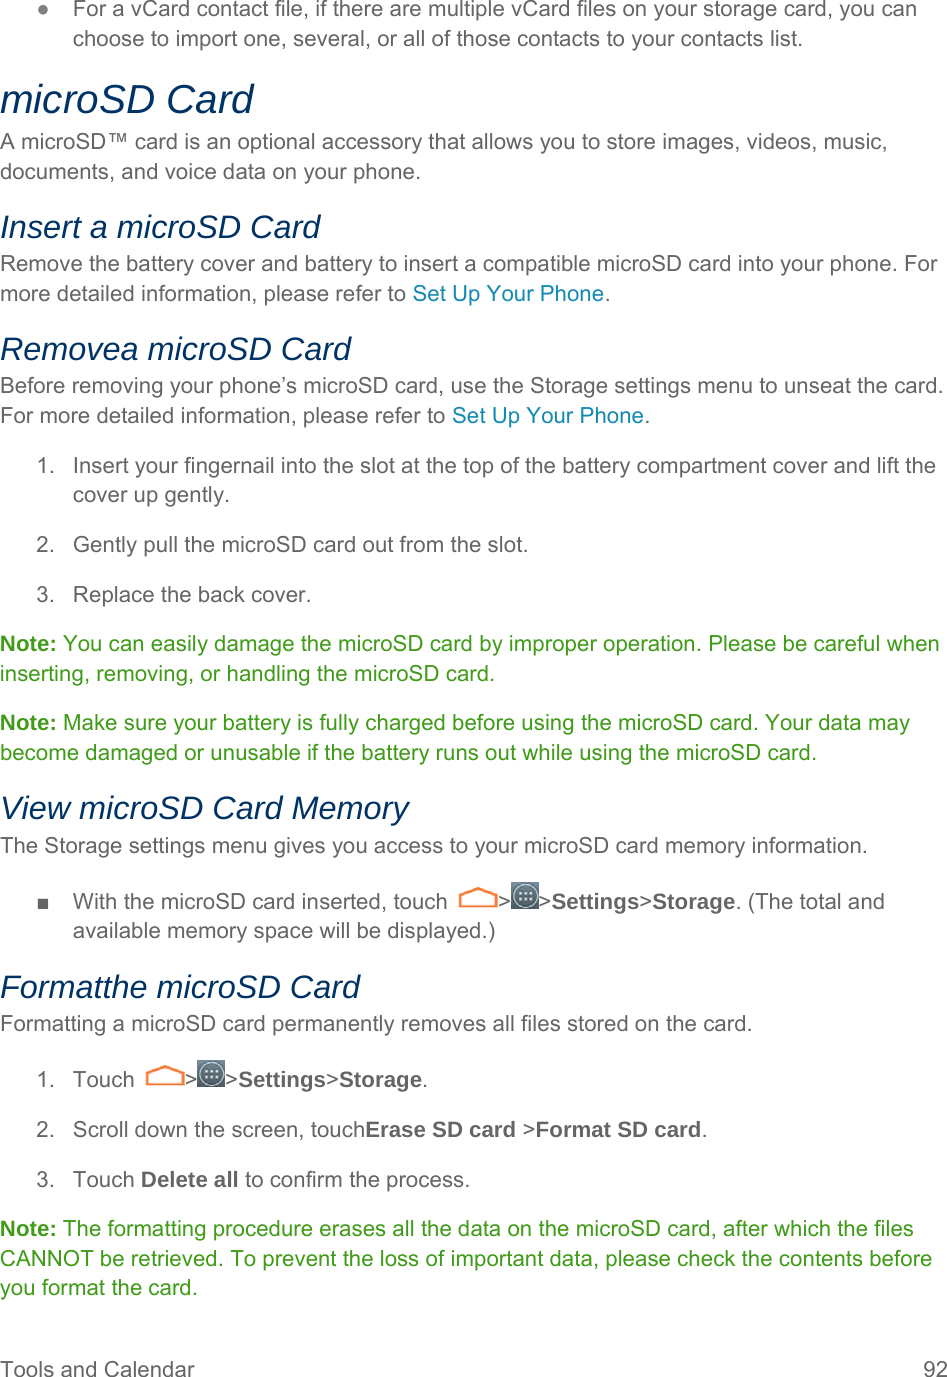 Tools and Calendar  92 ● For a vCard contact file, if there are multiple vCard files on your storage card, you can choose to import one, several, or all of those contacts to your contacts list. microSD Card A microSD™ card is an optional accessory that allows you to store images, videos, music, documents, and voice data on your phone. Insert a microSD Card Remove the battery cover and battery to insert a compatible microSD card into your phone. For more detailed information, please refer to Set Up Your Phone. Removea microSD Card Before removing your phone’s microSD card, use the Storage settings menu to unseat the card. For more detailed information, please refer to Set Up Your Phone. 1.  Insert your fingernail into the slot at the top of the battery compartment cover and lift the cover up gently. 2.  Gently pull the microSD card out from the slot. 3.  Replace the back cover. Note: You can easily damage the microSD card by improper operation. Please be careful when inserting, removing, or handling the microSD card. Note: Make sure your battery is fully charged before using the microSD card. Your data may become damaged or unusable if the battery runs out while using the microSD card. View microSD Card Memory The Storage settings menu gives you access to your microSD card memory information. ■  With the microSD card inserted, touch  &gt; &gt;Settings&gt;Storage. (The total and available memory space will be displayed.) Formatthe microSD Card Formatting a microSD card permanently removes all files stored on the card. 1. Touch  &gt; &gt;Settings&gt;Storage. 2.  Scroll down the screen, touchErase SD card &gt;Format SD card. 3. Touch Delete all to confirm the process. Note: The formatting procedure erases all the data on the microSD card, after which the files CANNOT be retrieved. To prevent the loss of important data, please check the contents before you format the card. 